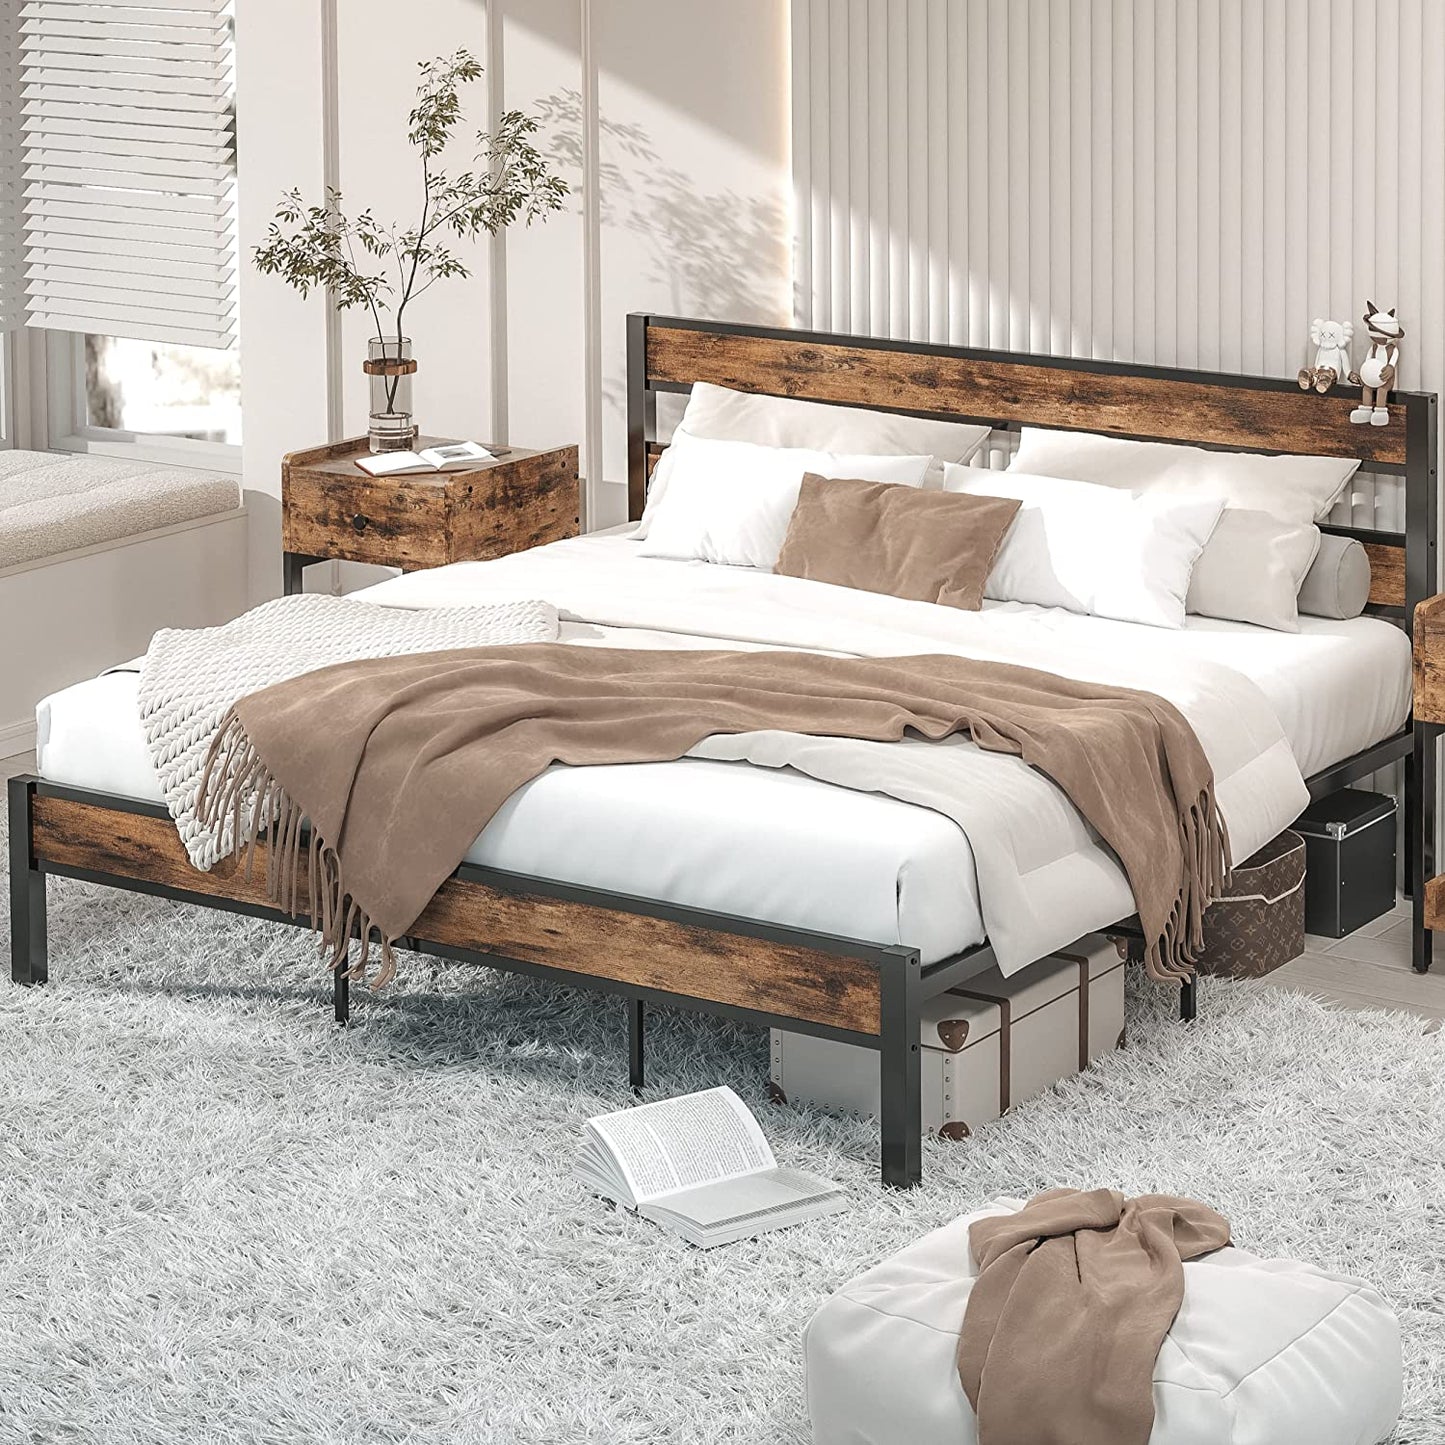 LIKIMIO California King Bed Frames Cal King/Industrial Brown